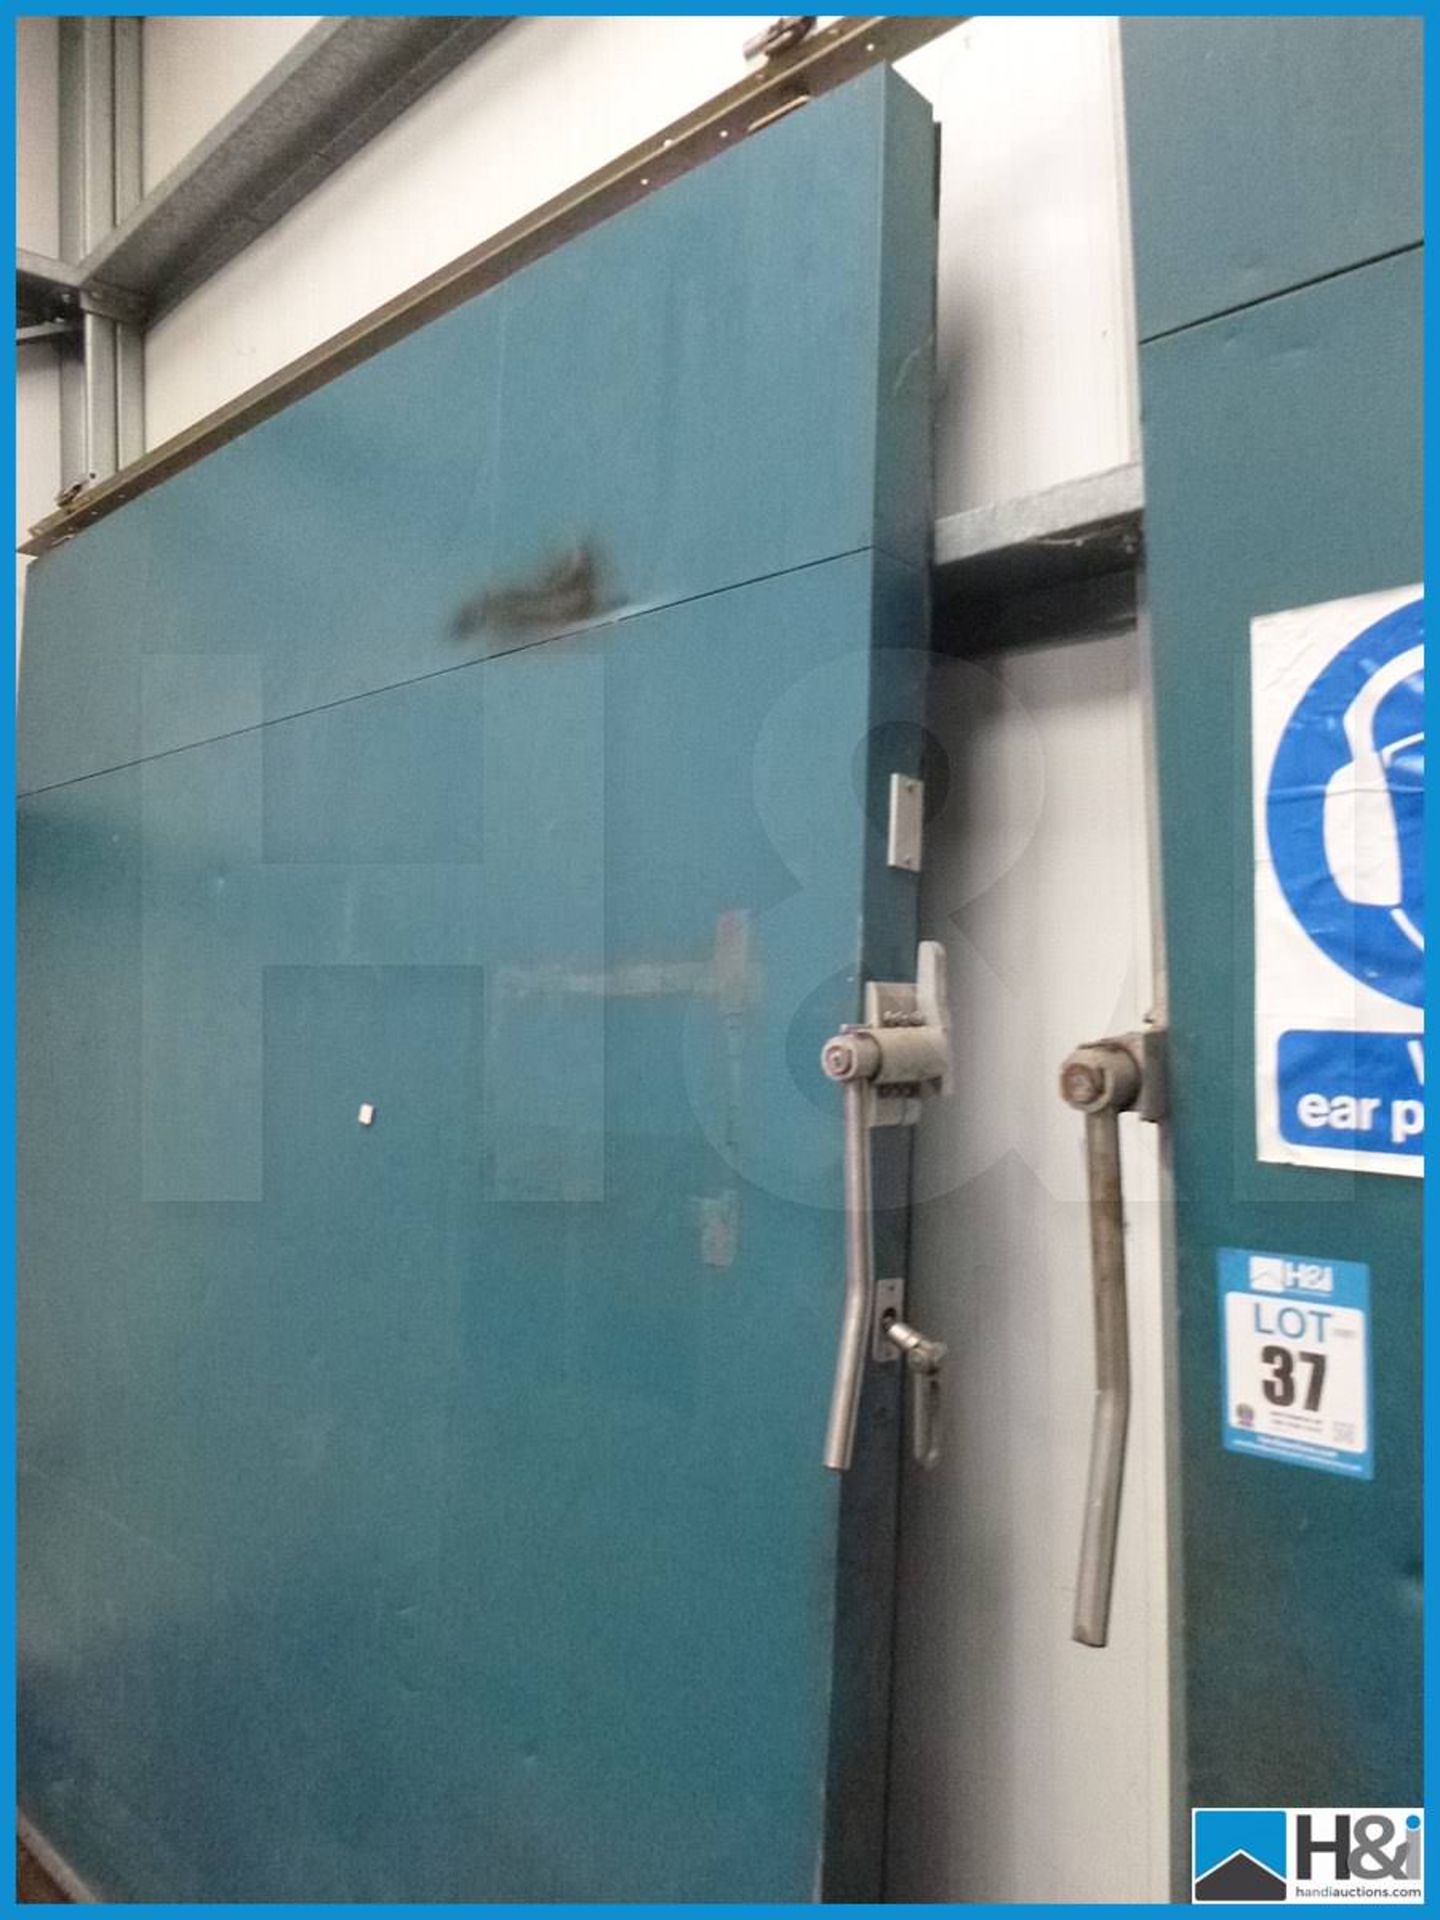 2 OFF - SLIDING WELDING DOORS, INCLUDING SLIDING TRACK AND GEAR, EACH DOOR, 2570X2570 MM, USED, GOOD - Image 4 of 4